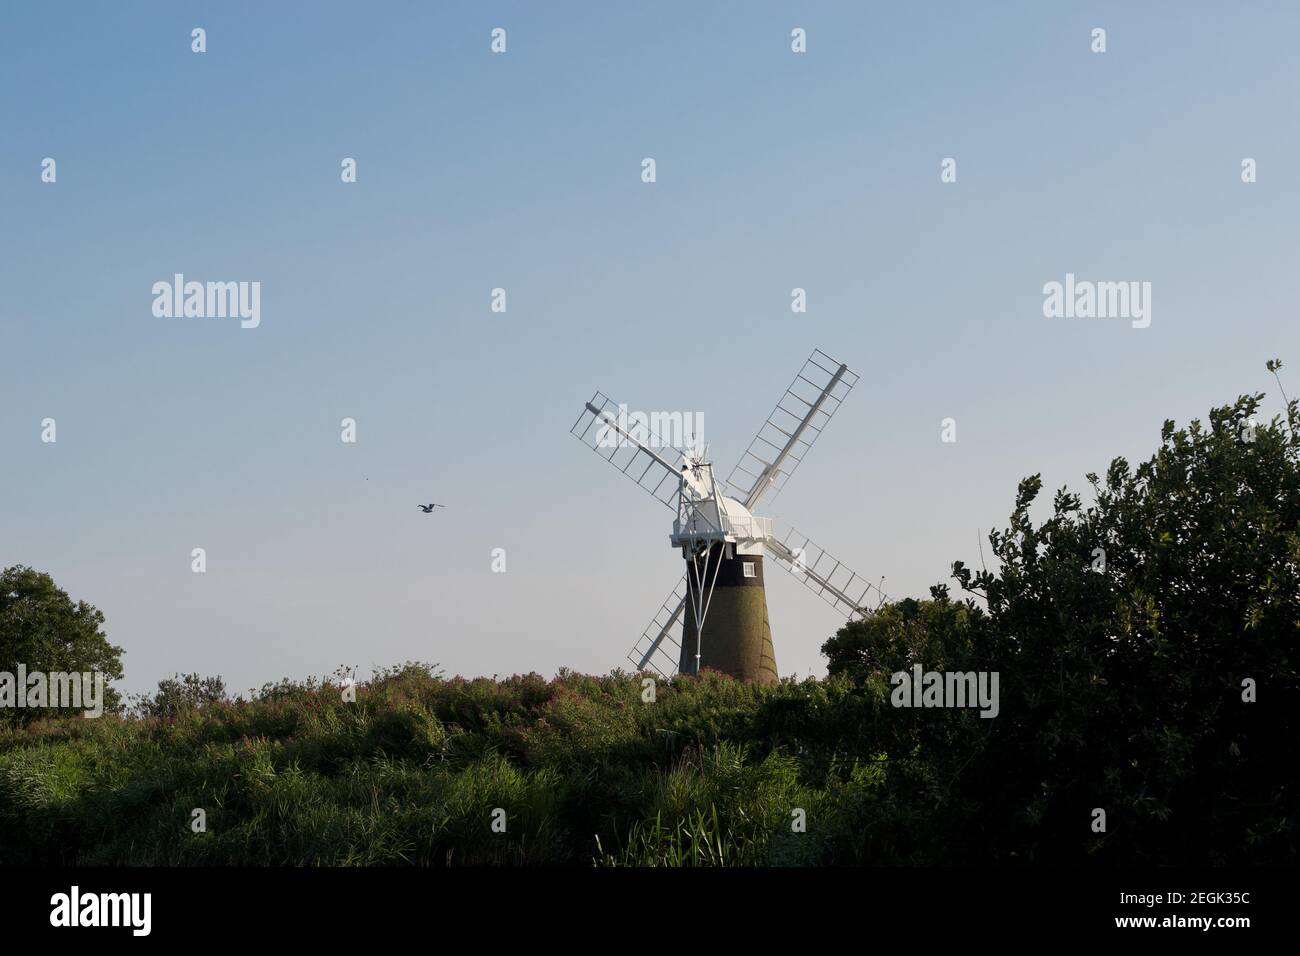 A rear view of a windmill (wind pump): tall traditional countryside building, surrounded by trees and bushes Stock Photo